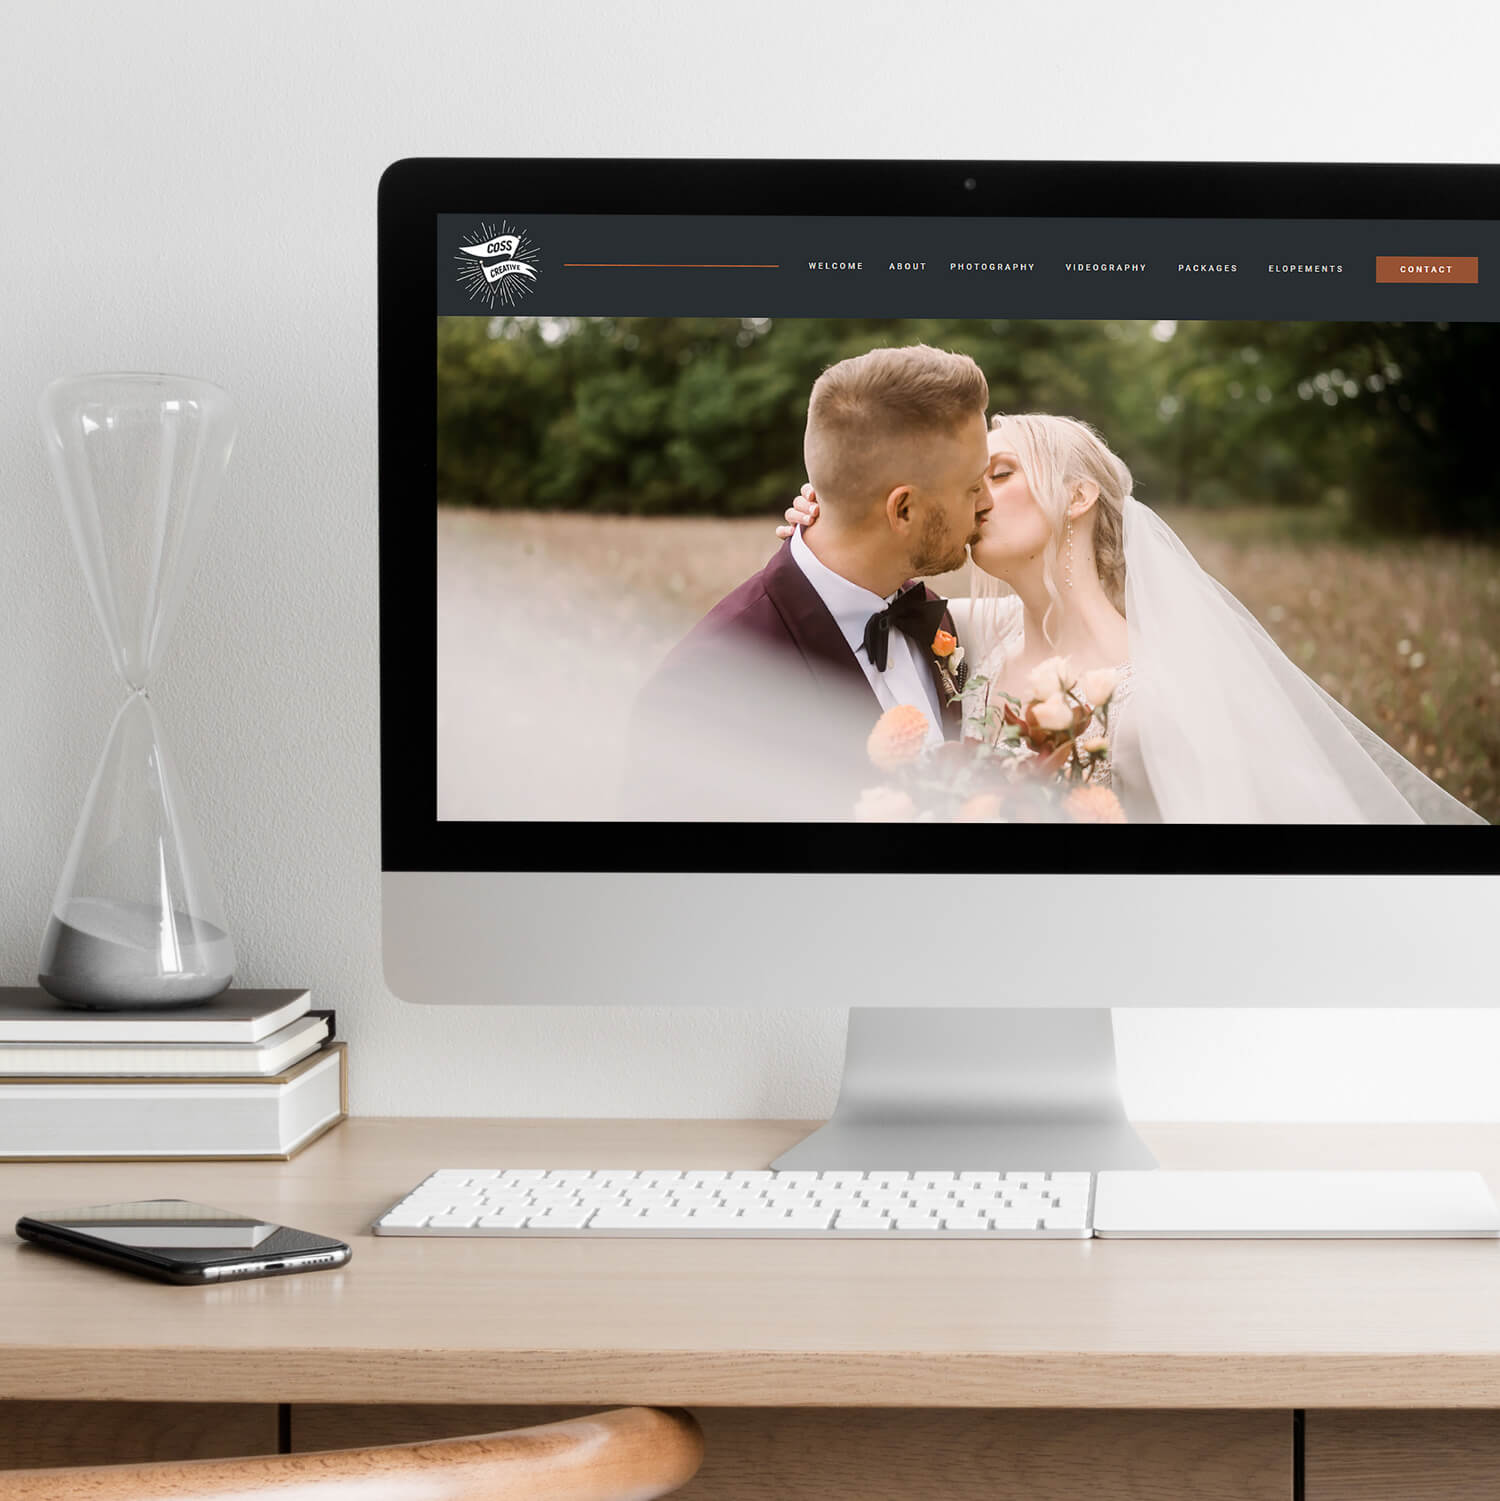 A modern home office setup with an iMac displaying a wedding photographer's website, featuring an image of a bride and groom kissing. In the foreground, a sand hourglass and a smartphone rest on the desk, enhancing the contemporary, professional atmosphere.